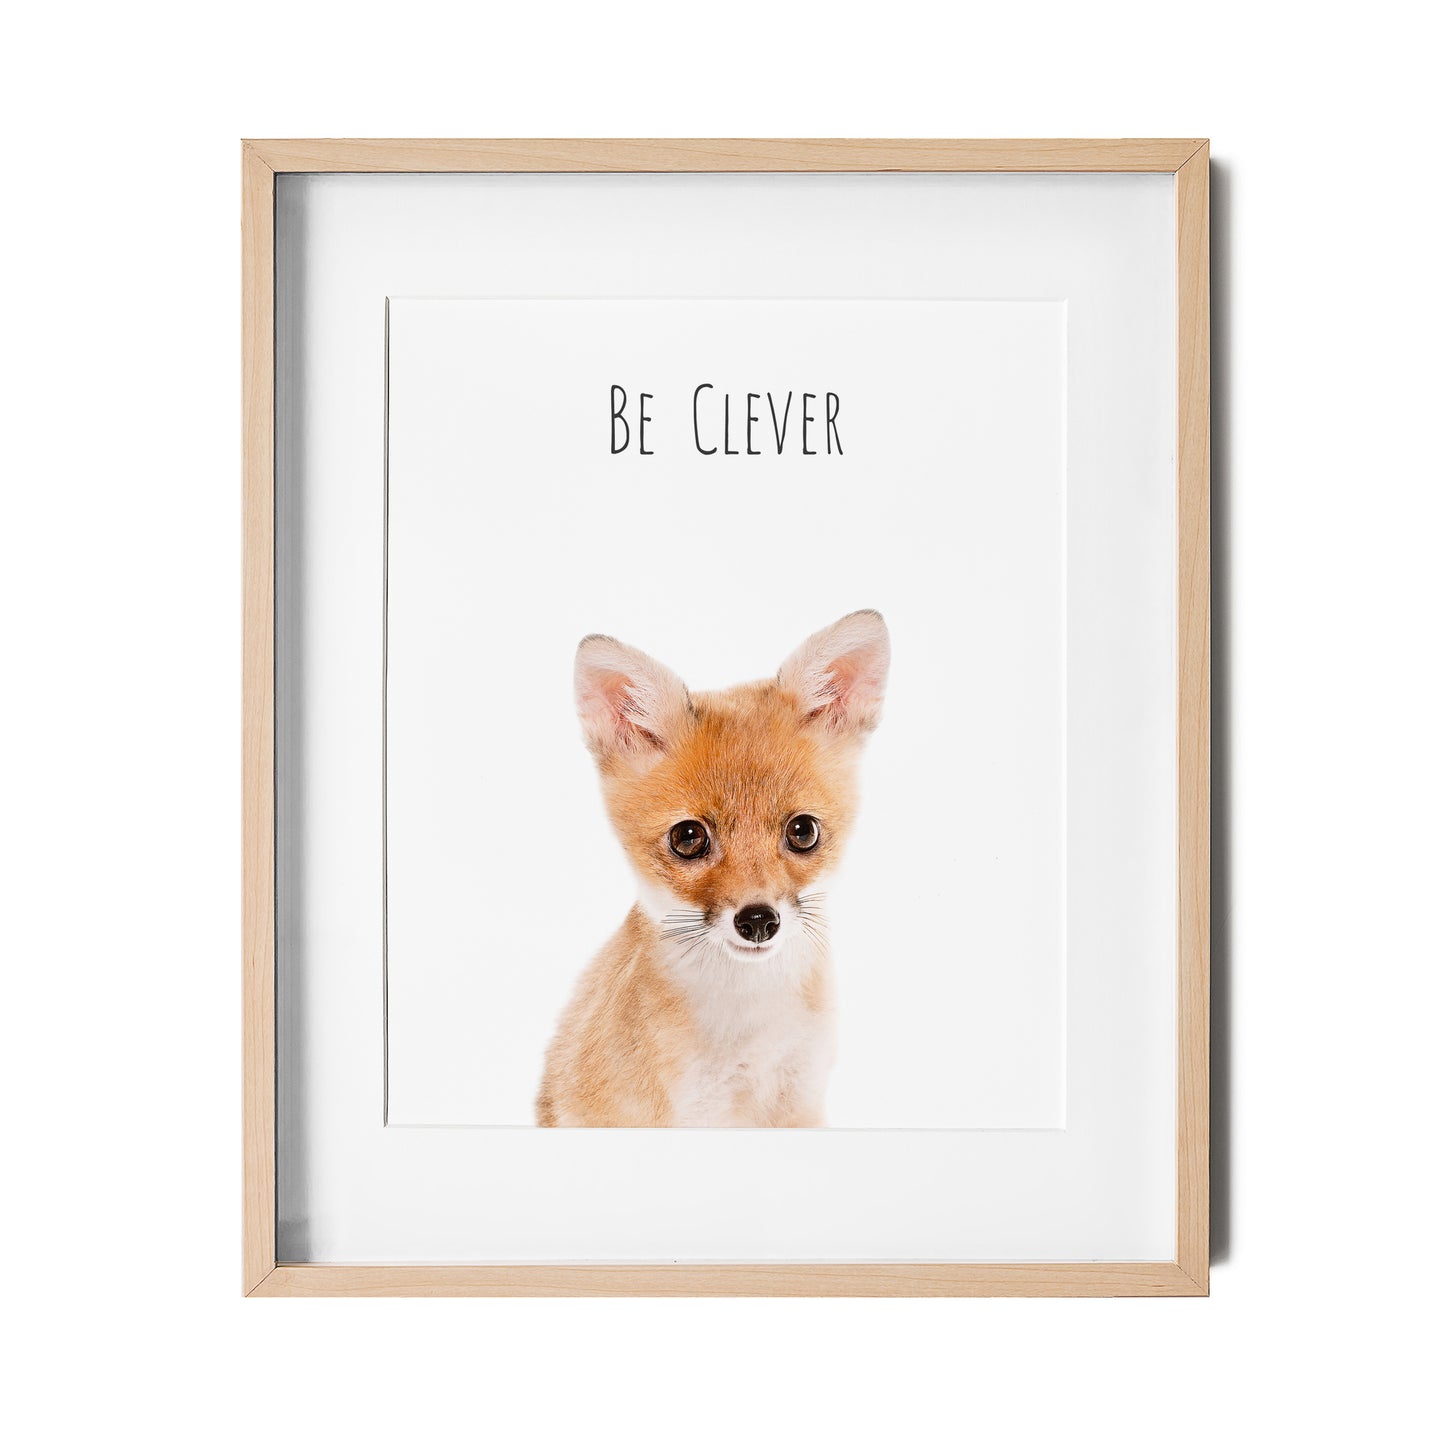 A picture of a baby fox with the words "Be Cleaver"